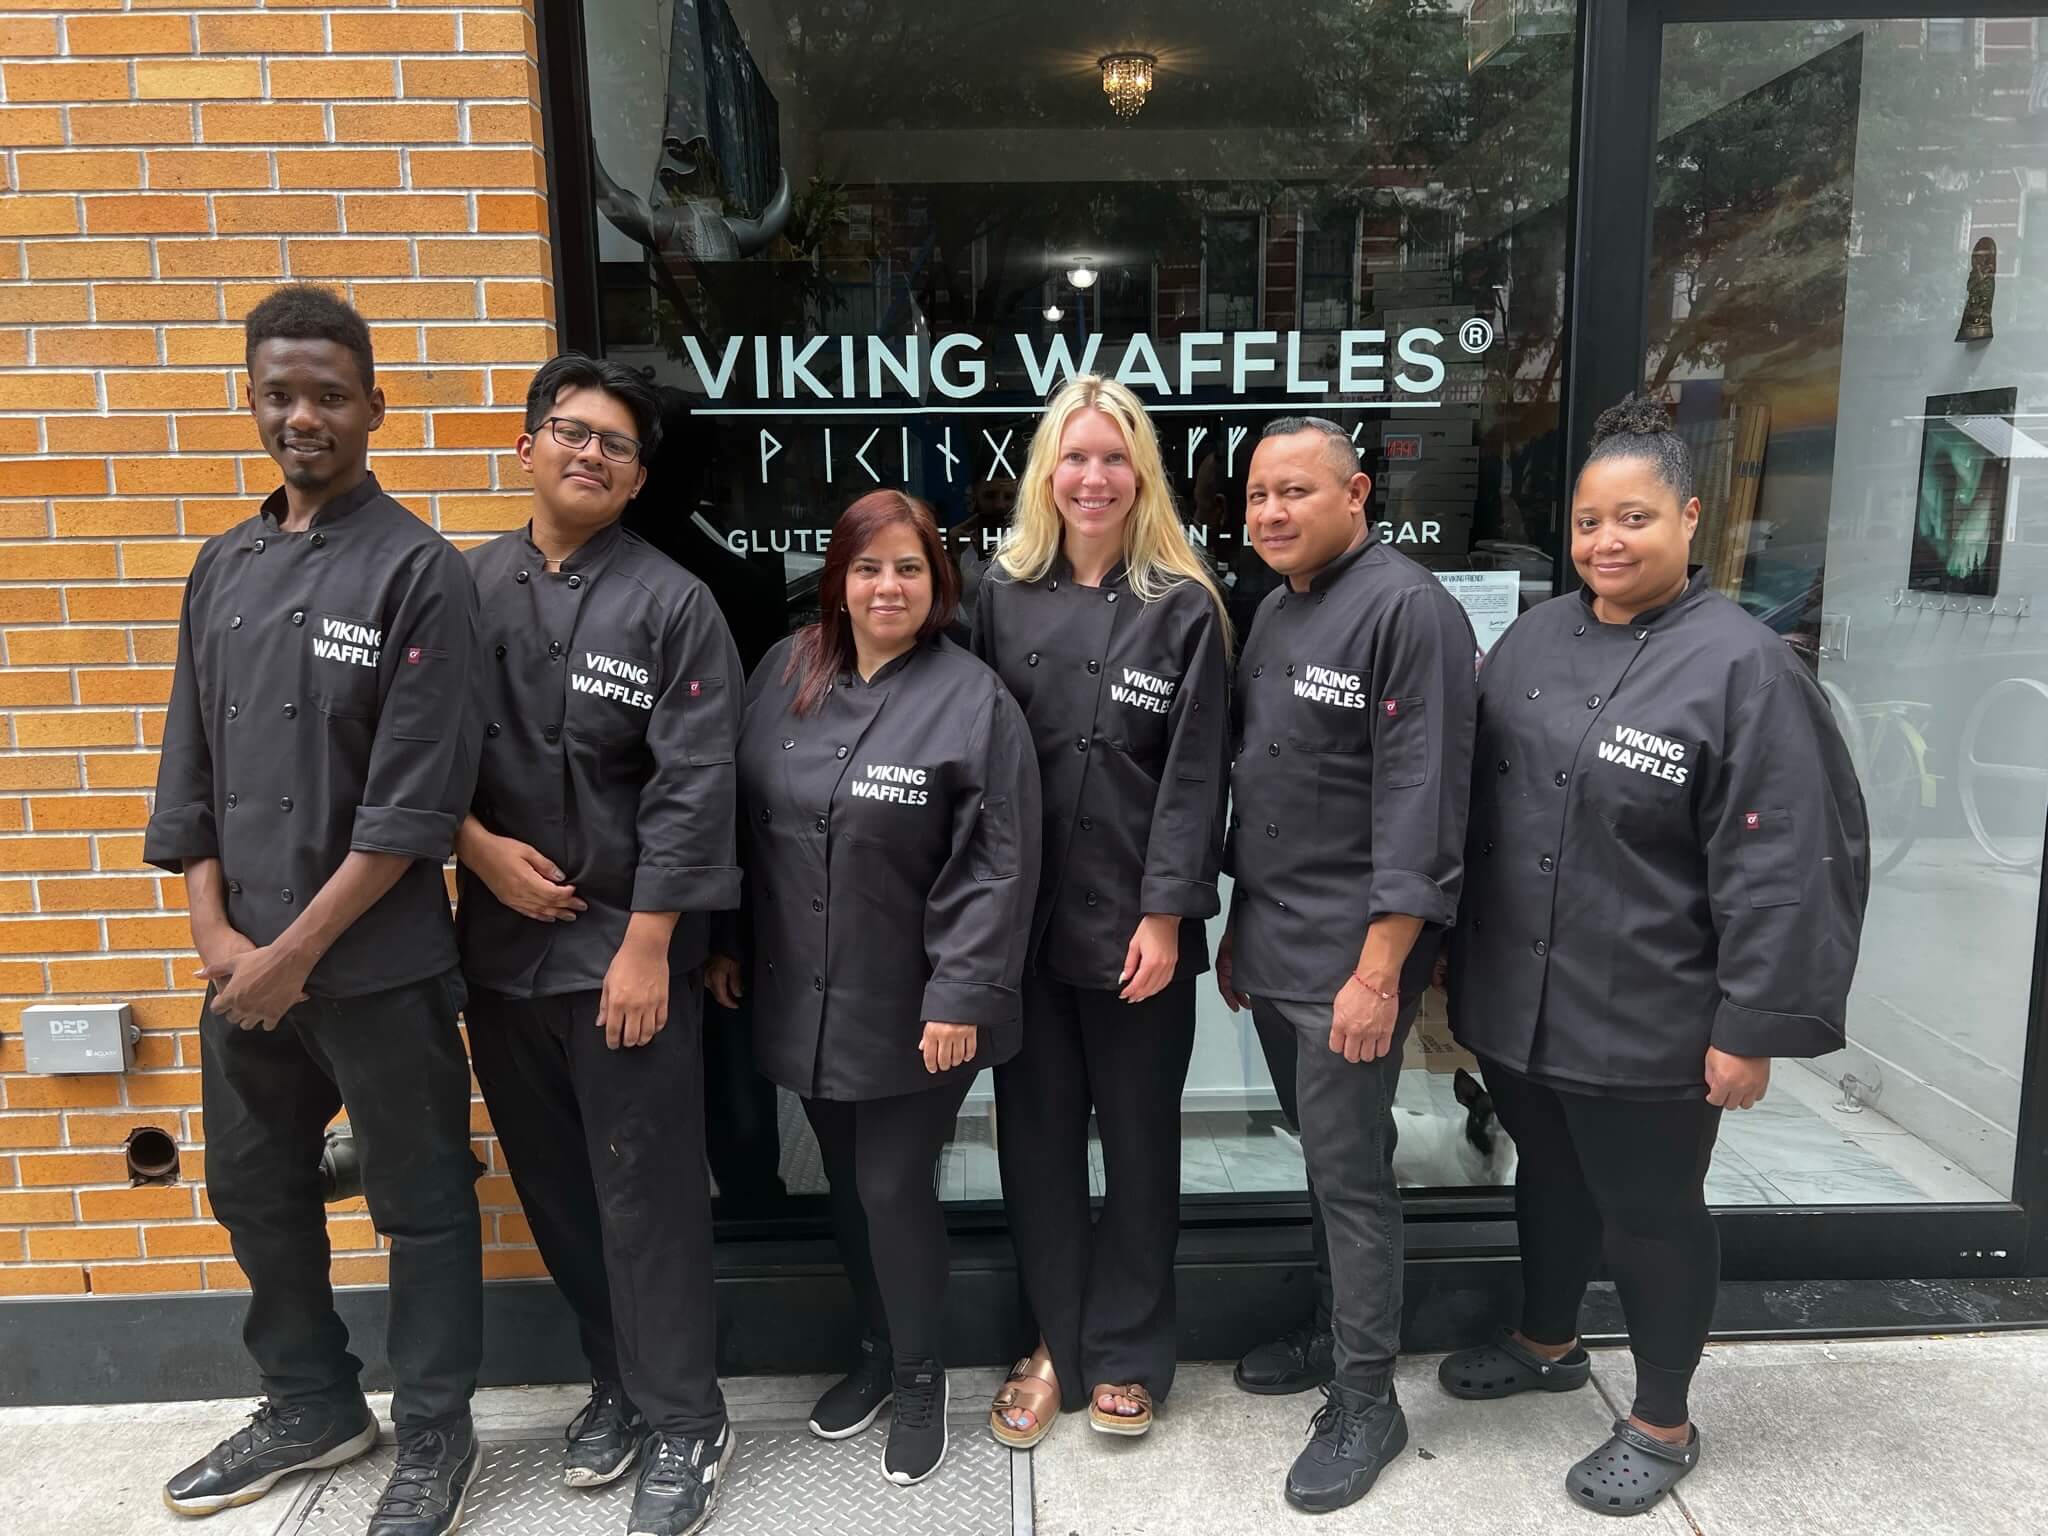 Image of 6 Viking Waffles employees standing in line and smiling outside their bakery with 